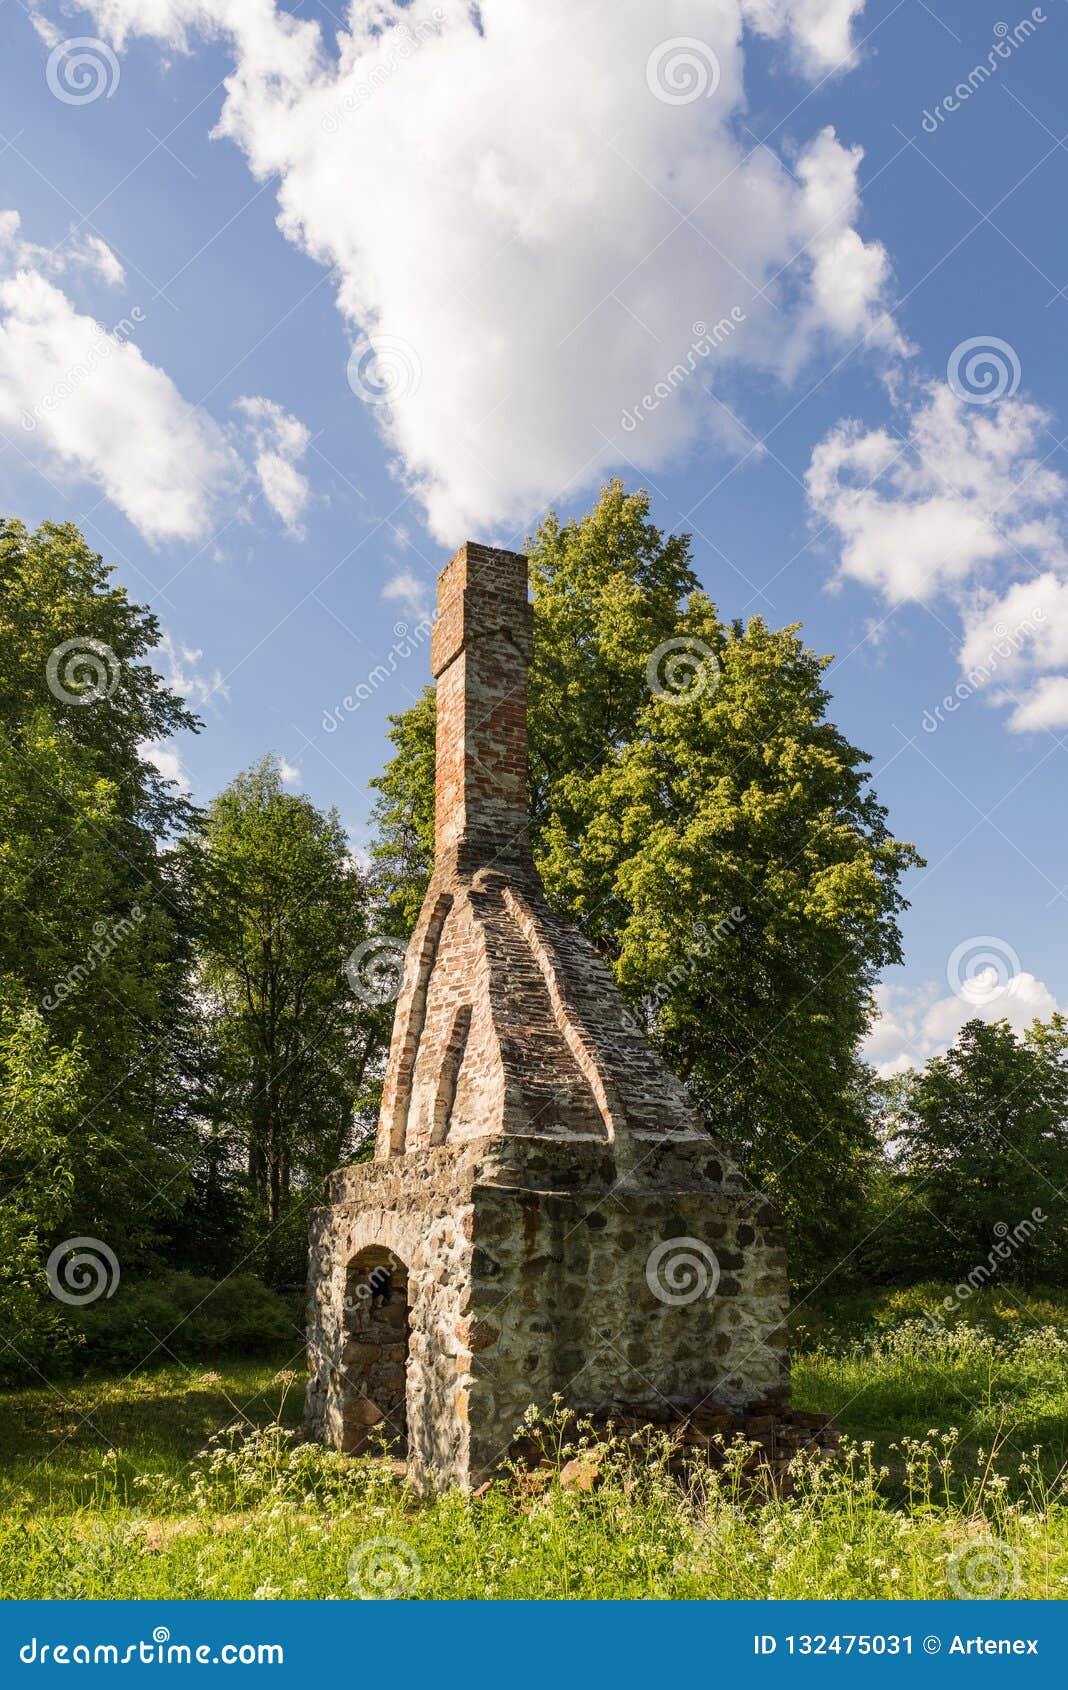 Ancient Abandoned Mill Surrounded by Beautiful Nature. House Built Stone and Wood, Exterior Walls and Dilapidated Bridge Stock Image - Image chimney, architecture: 132475031